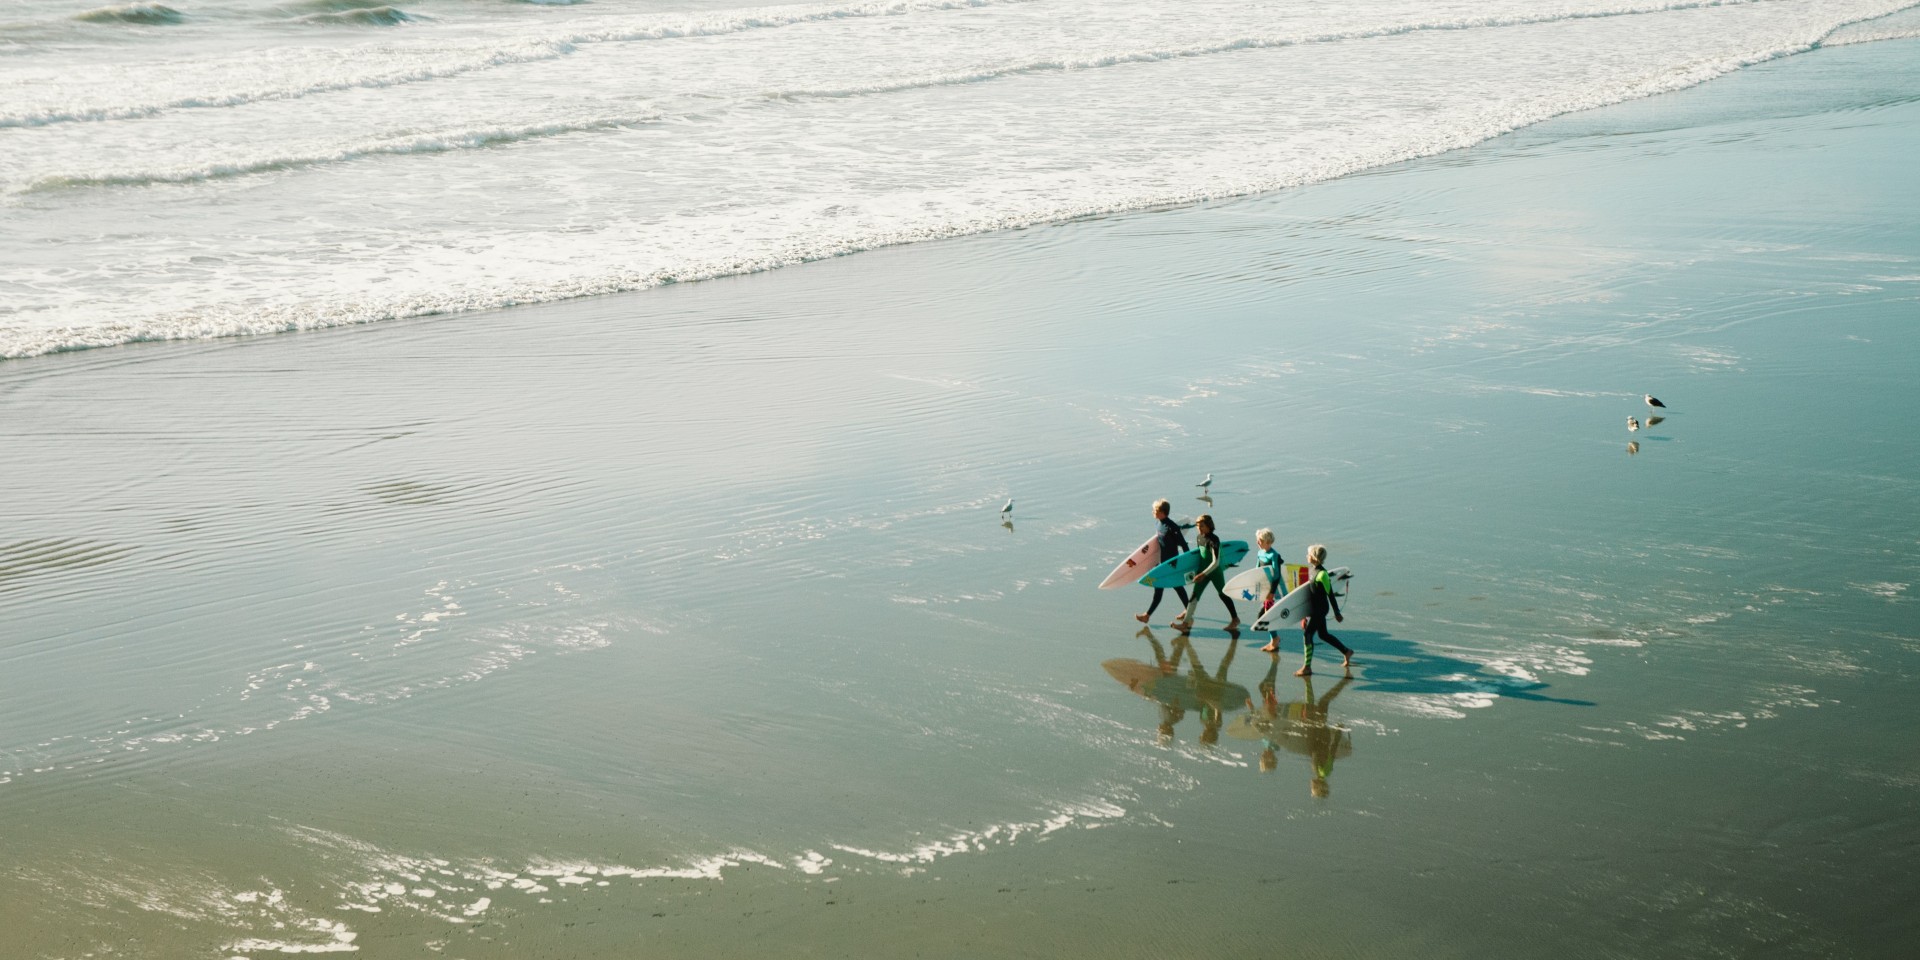 A family of surfers walking along the beach in the sun